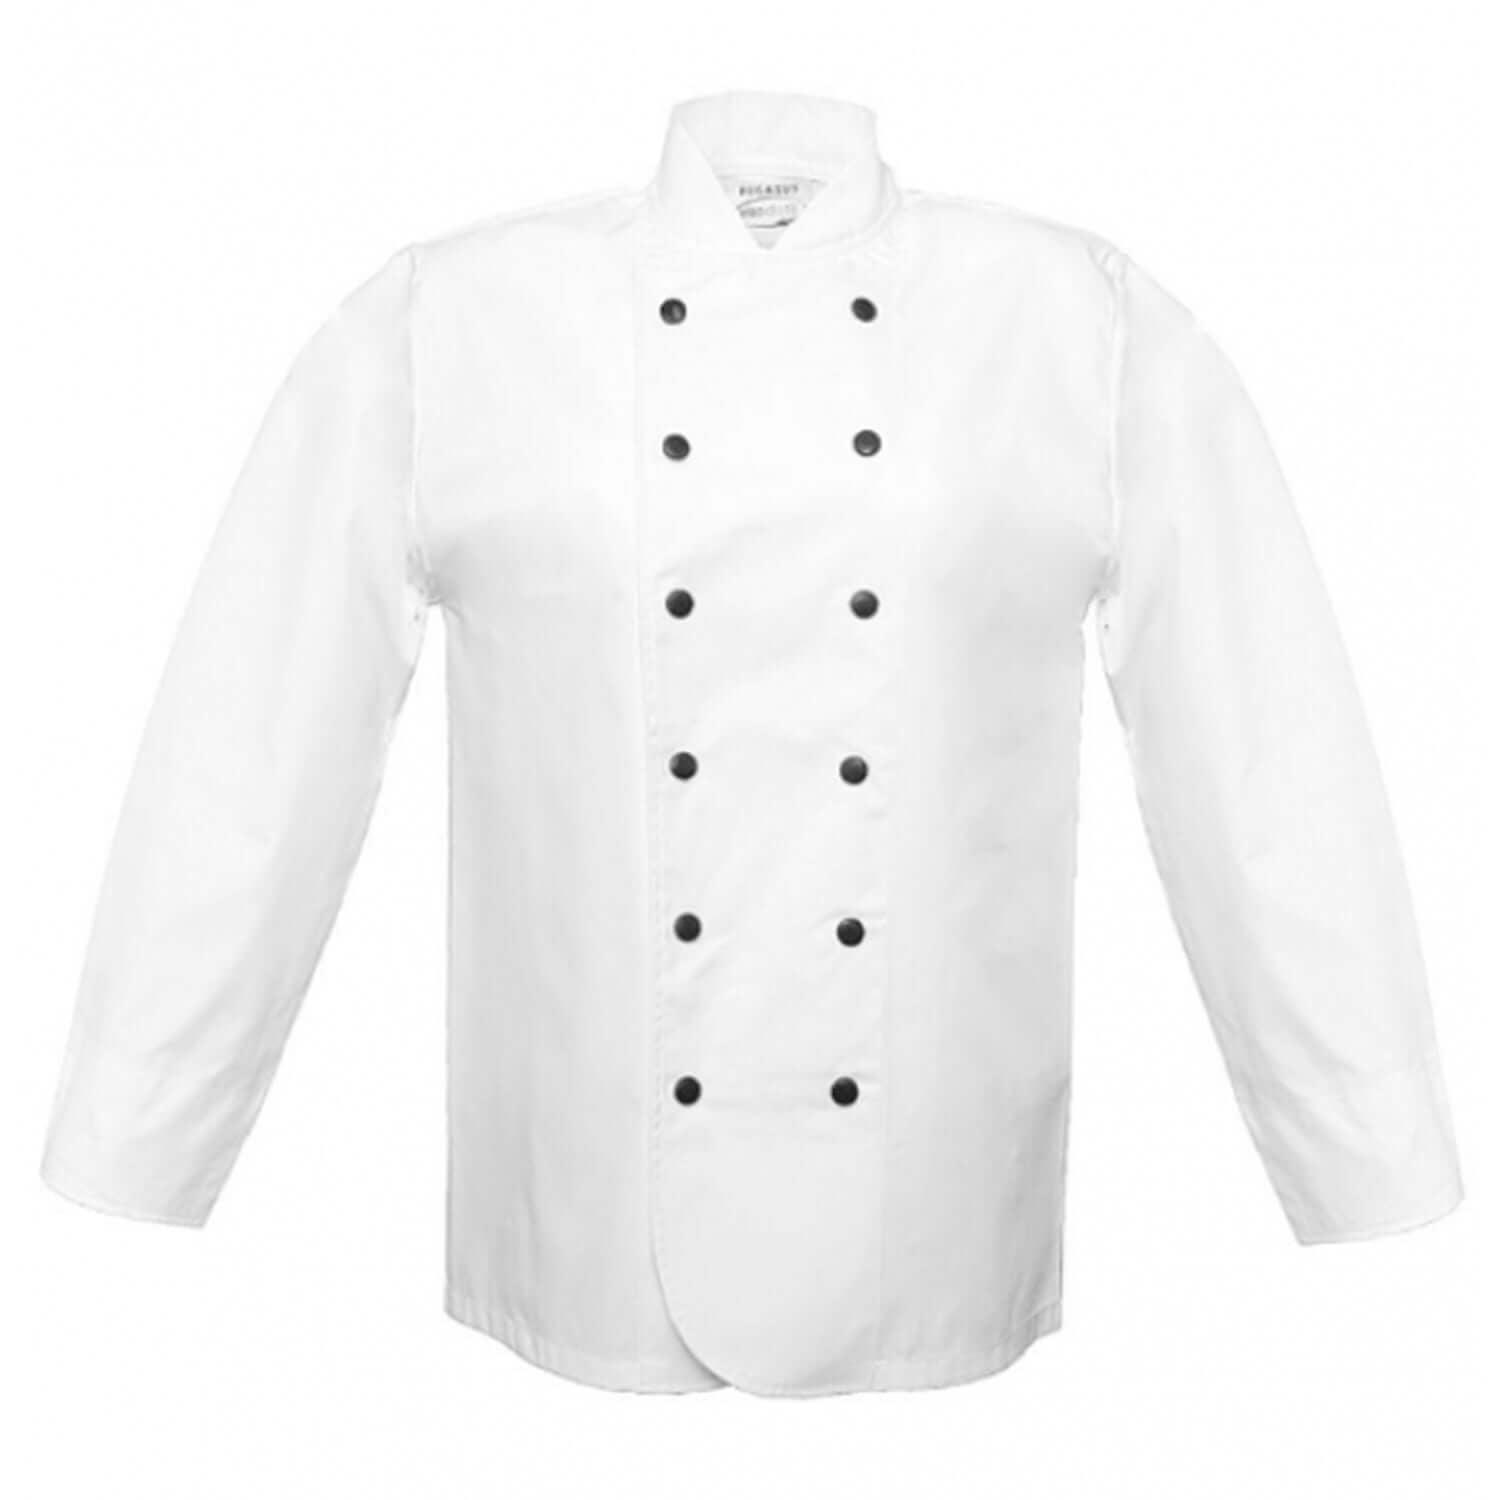 Pegasus White EKO Long Sleeved Chef Jackets with Black Poppers